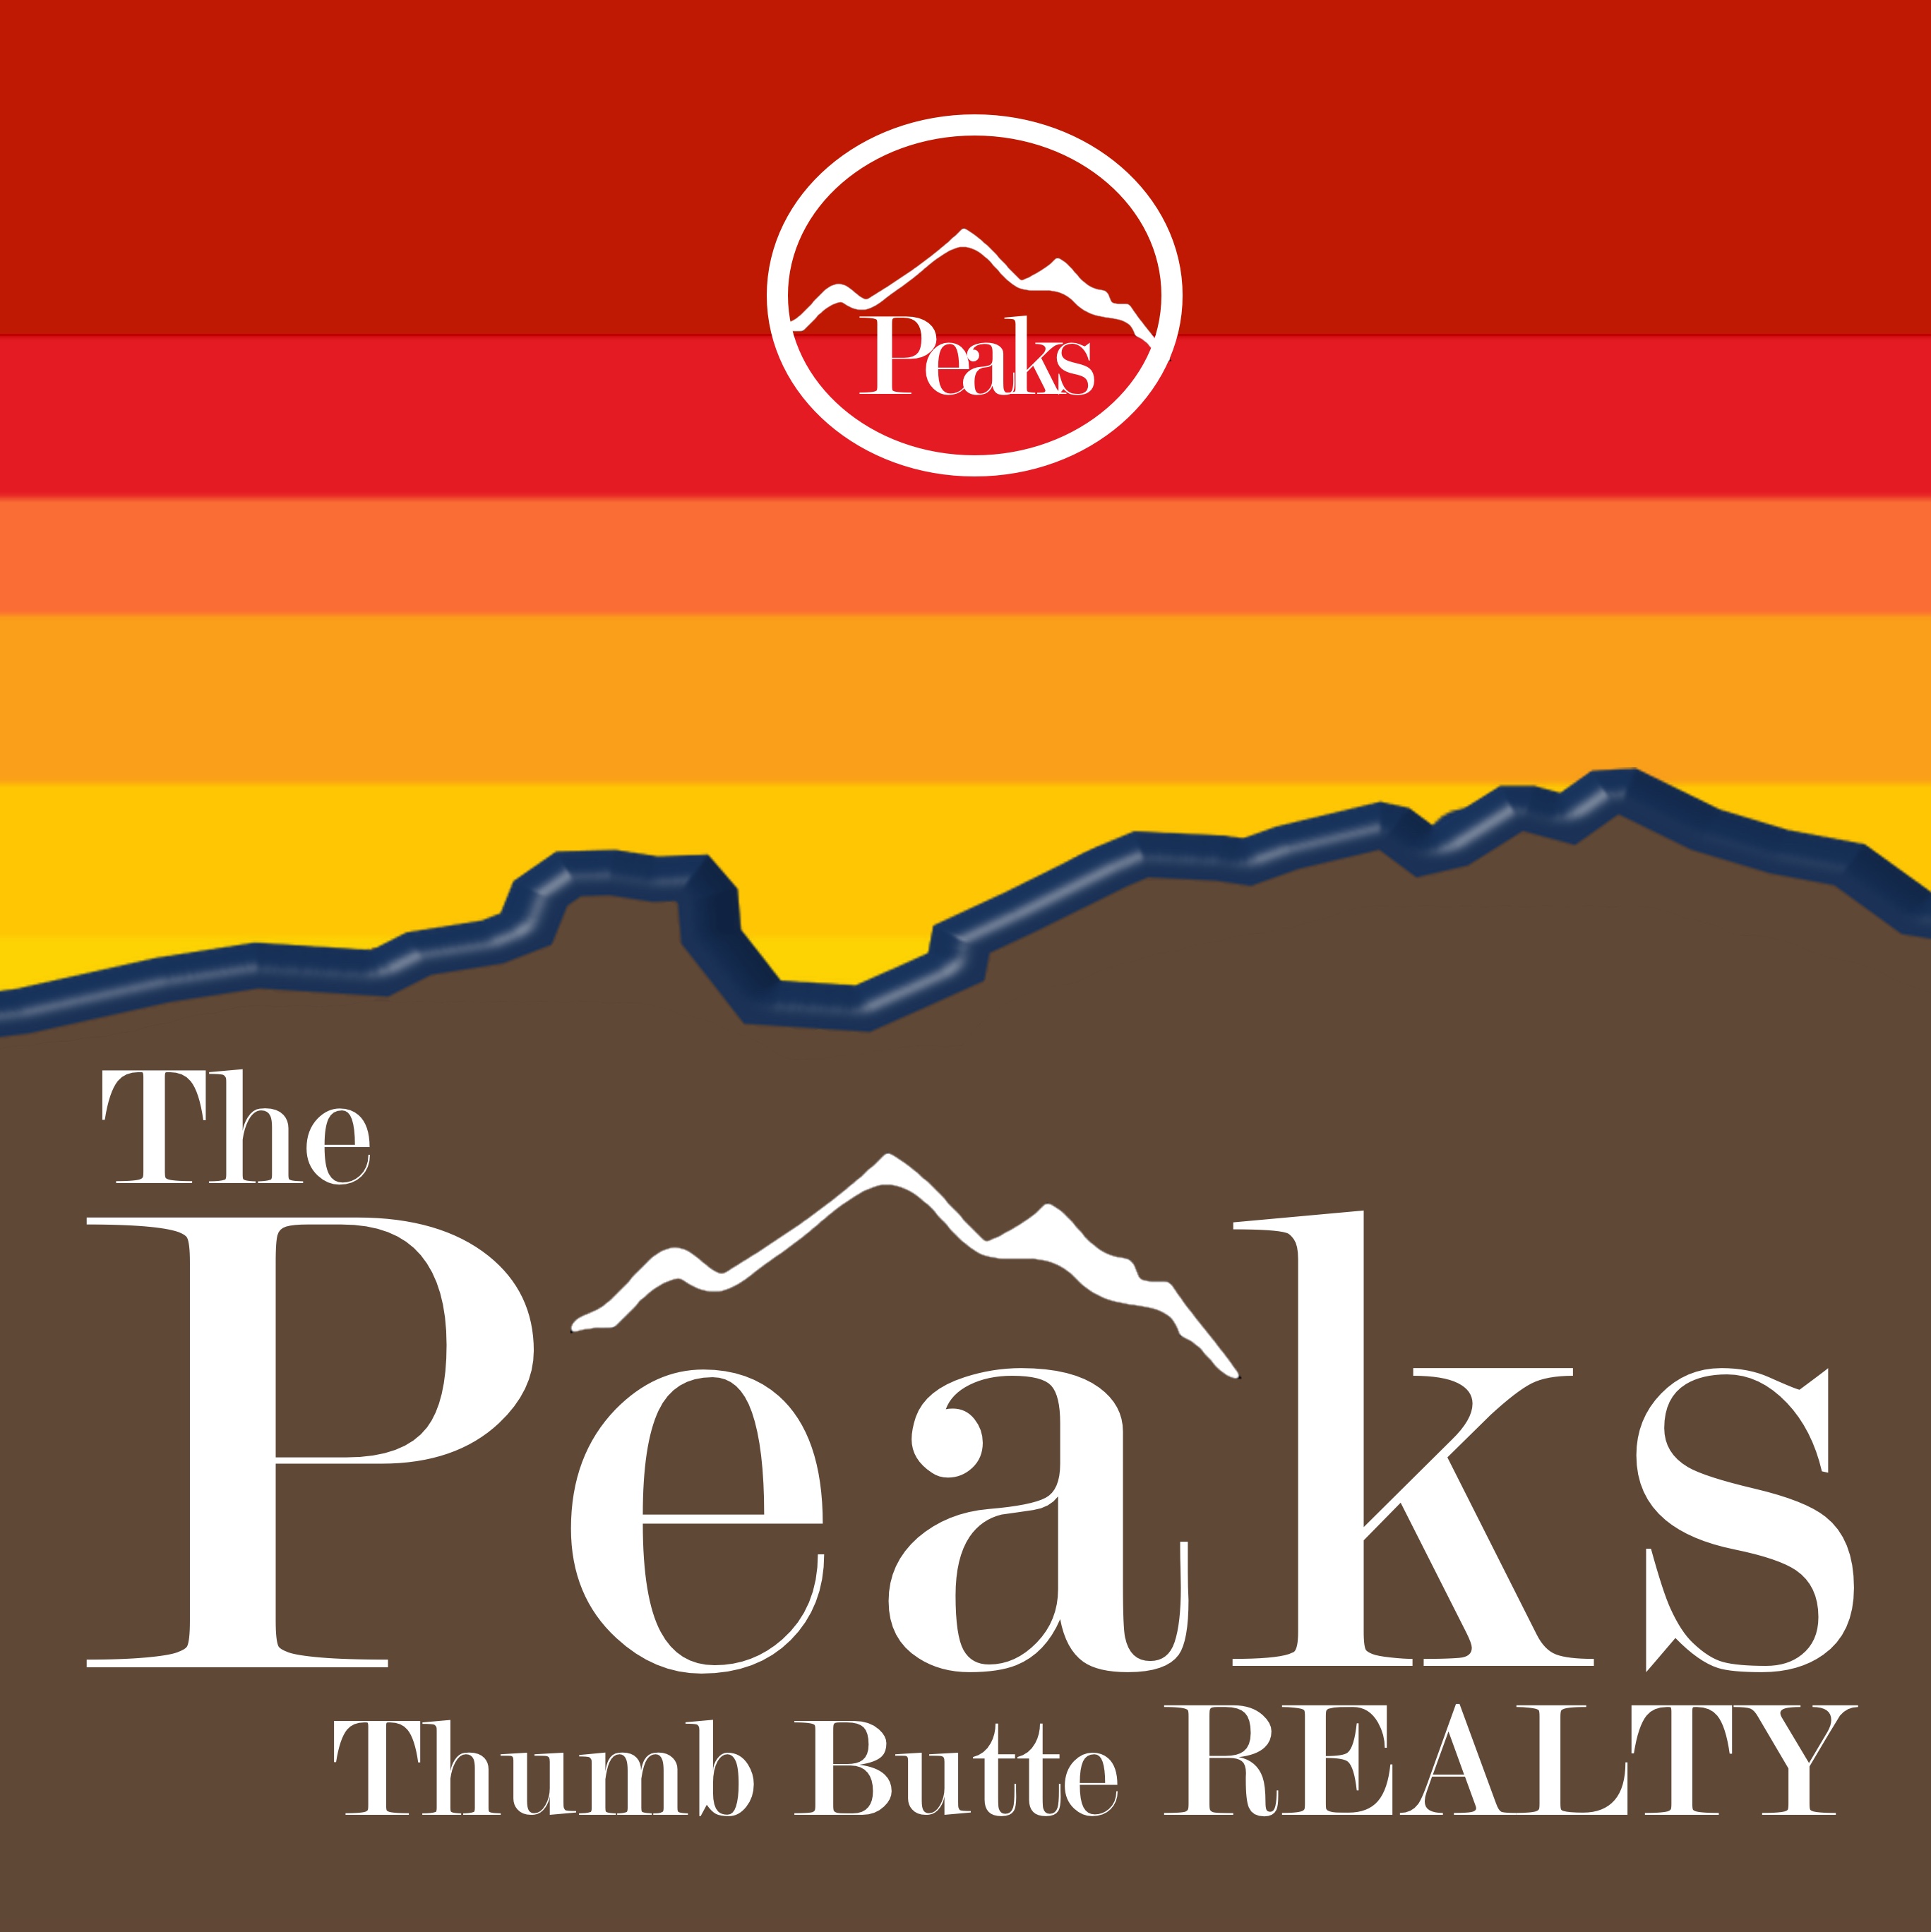 The Peaks Thumb Butte Realty